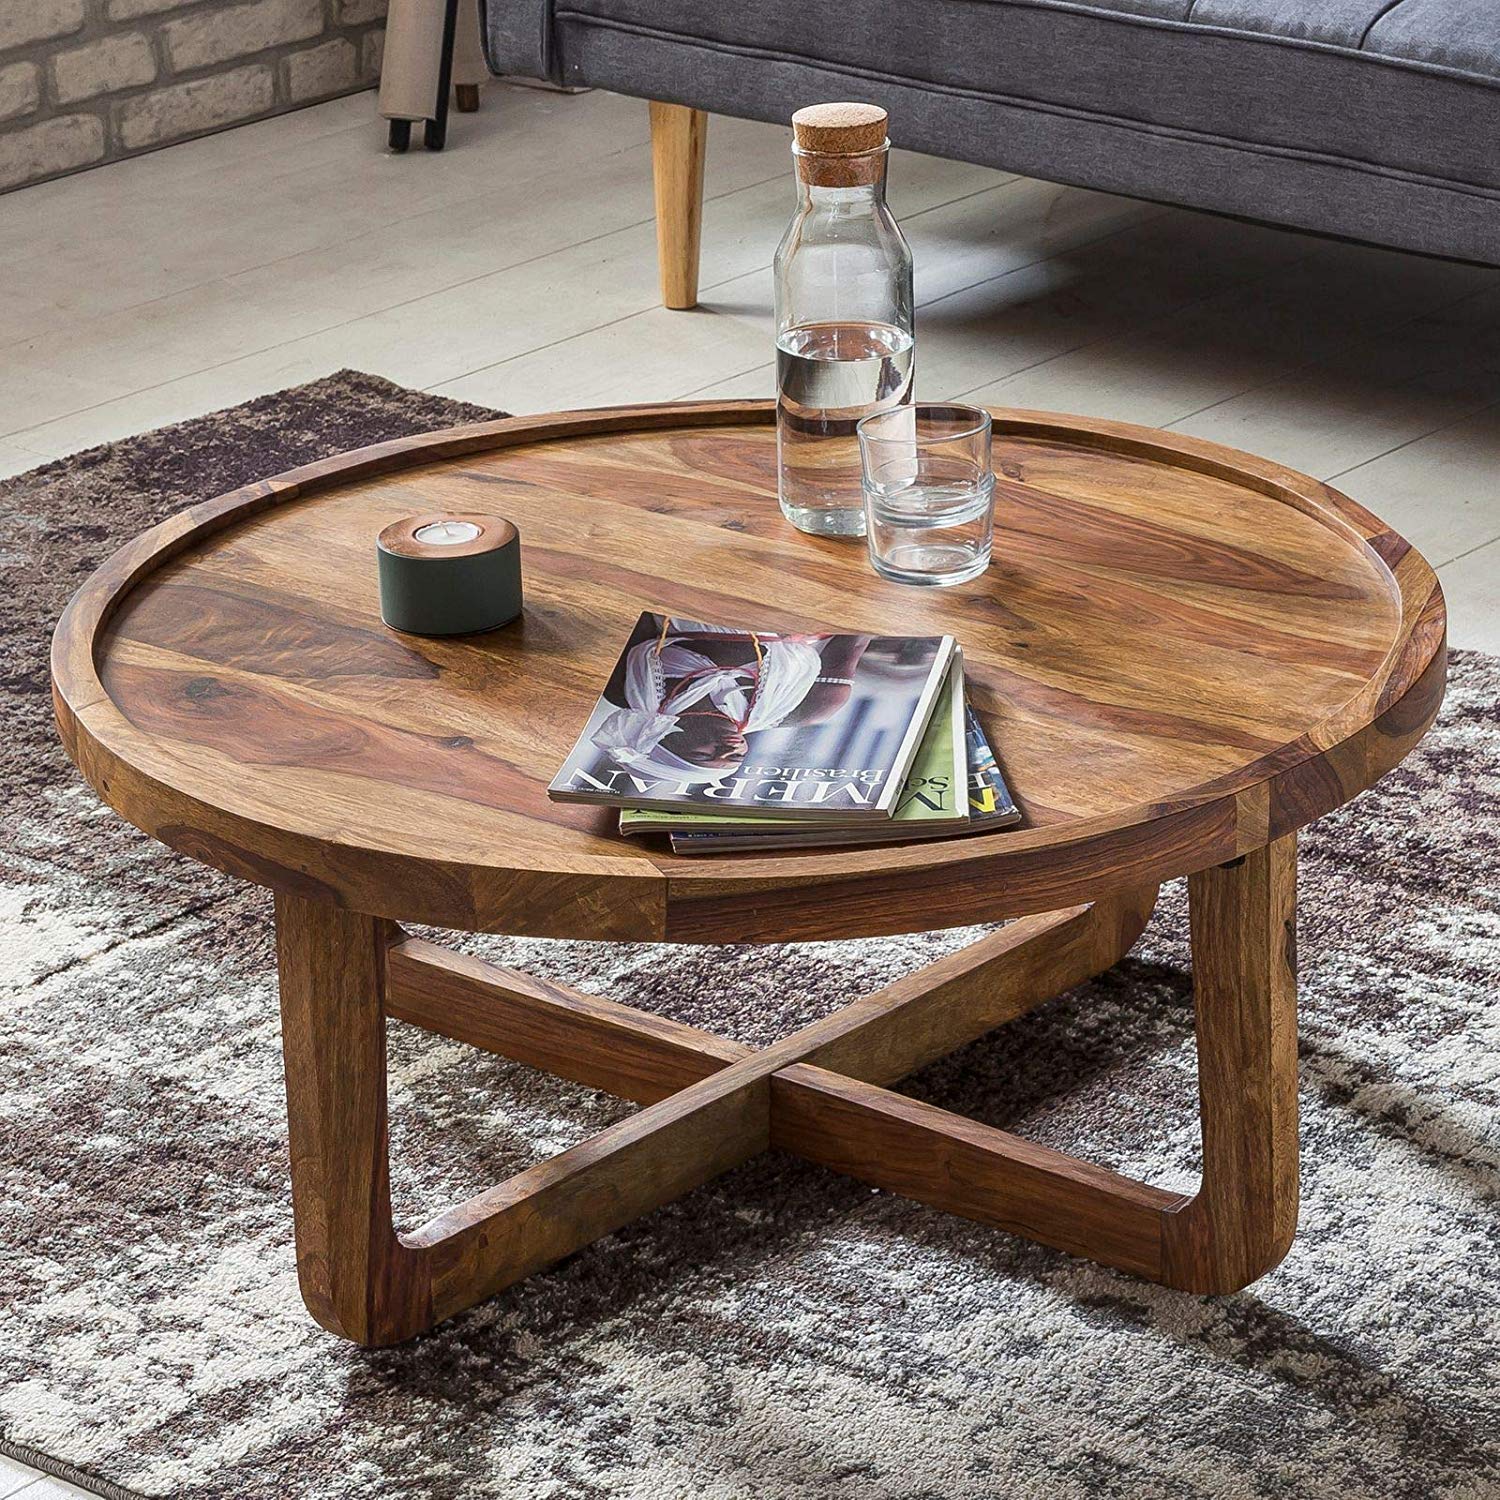 Buy Modern Coffee Table India Online at Best Price